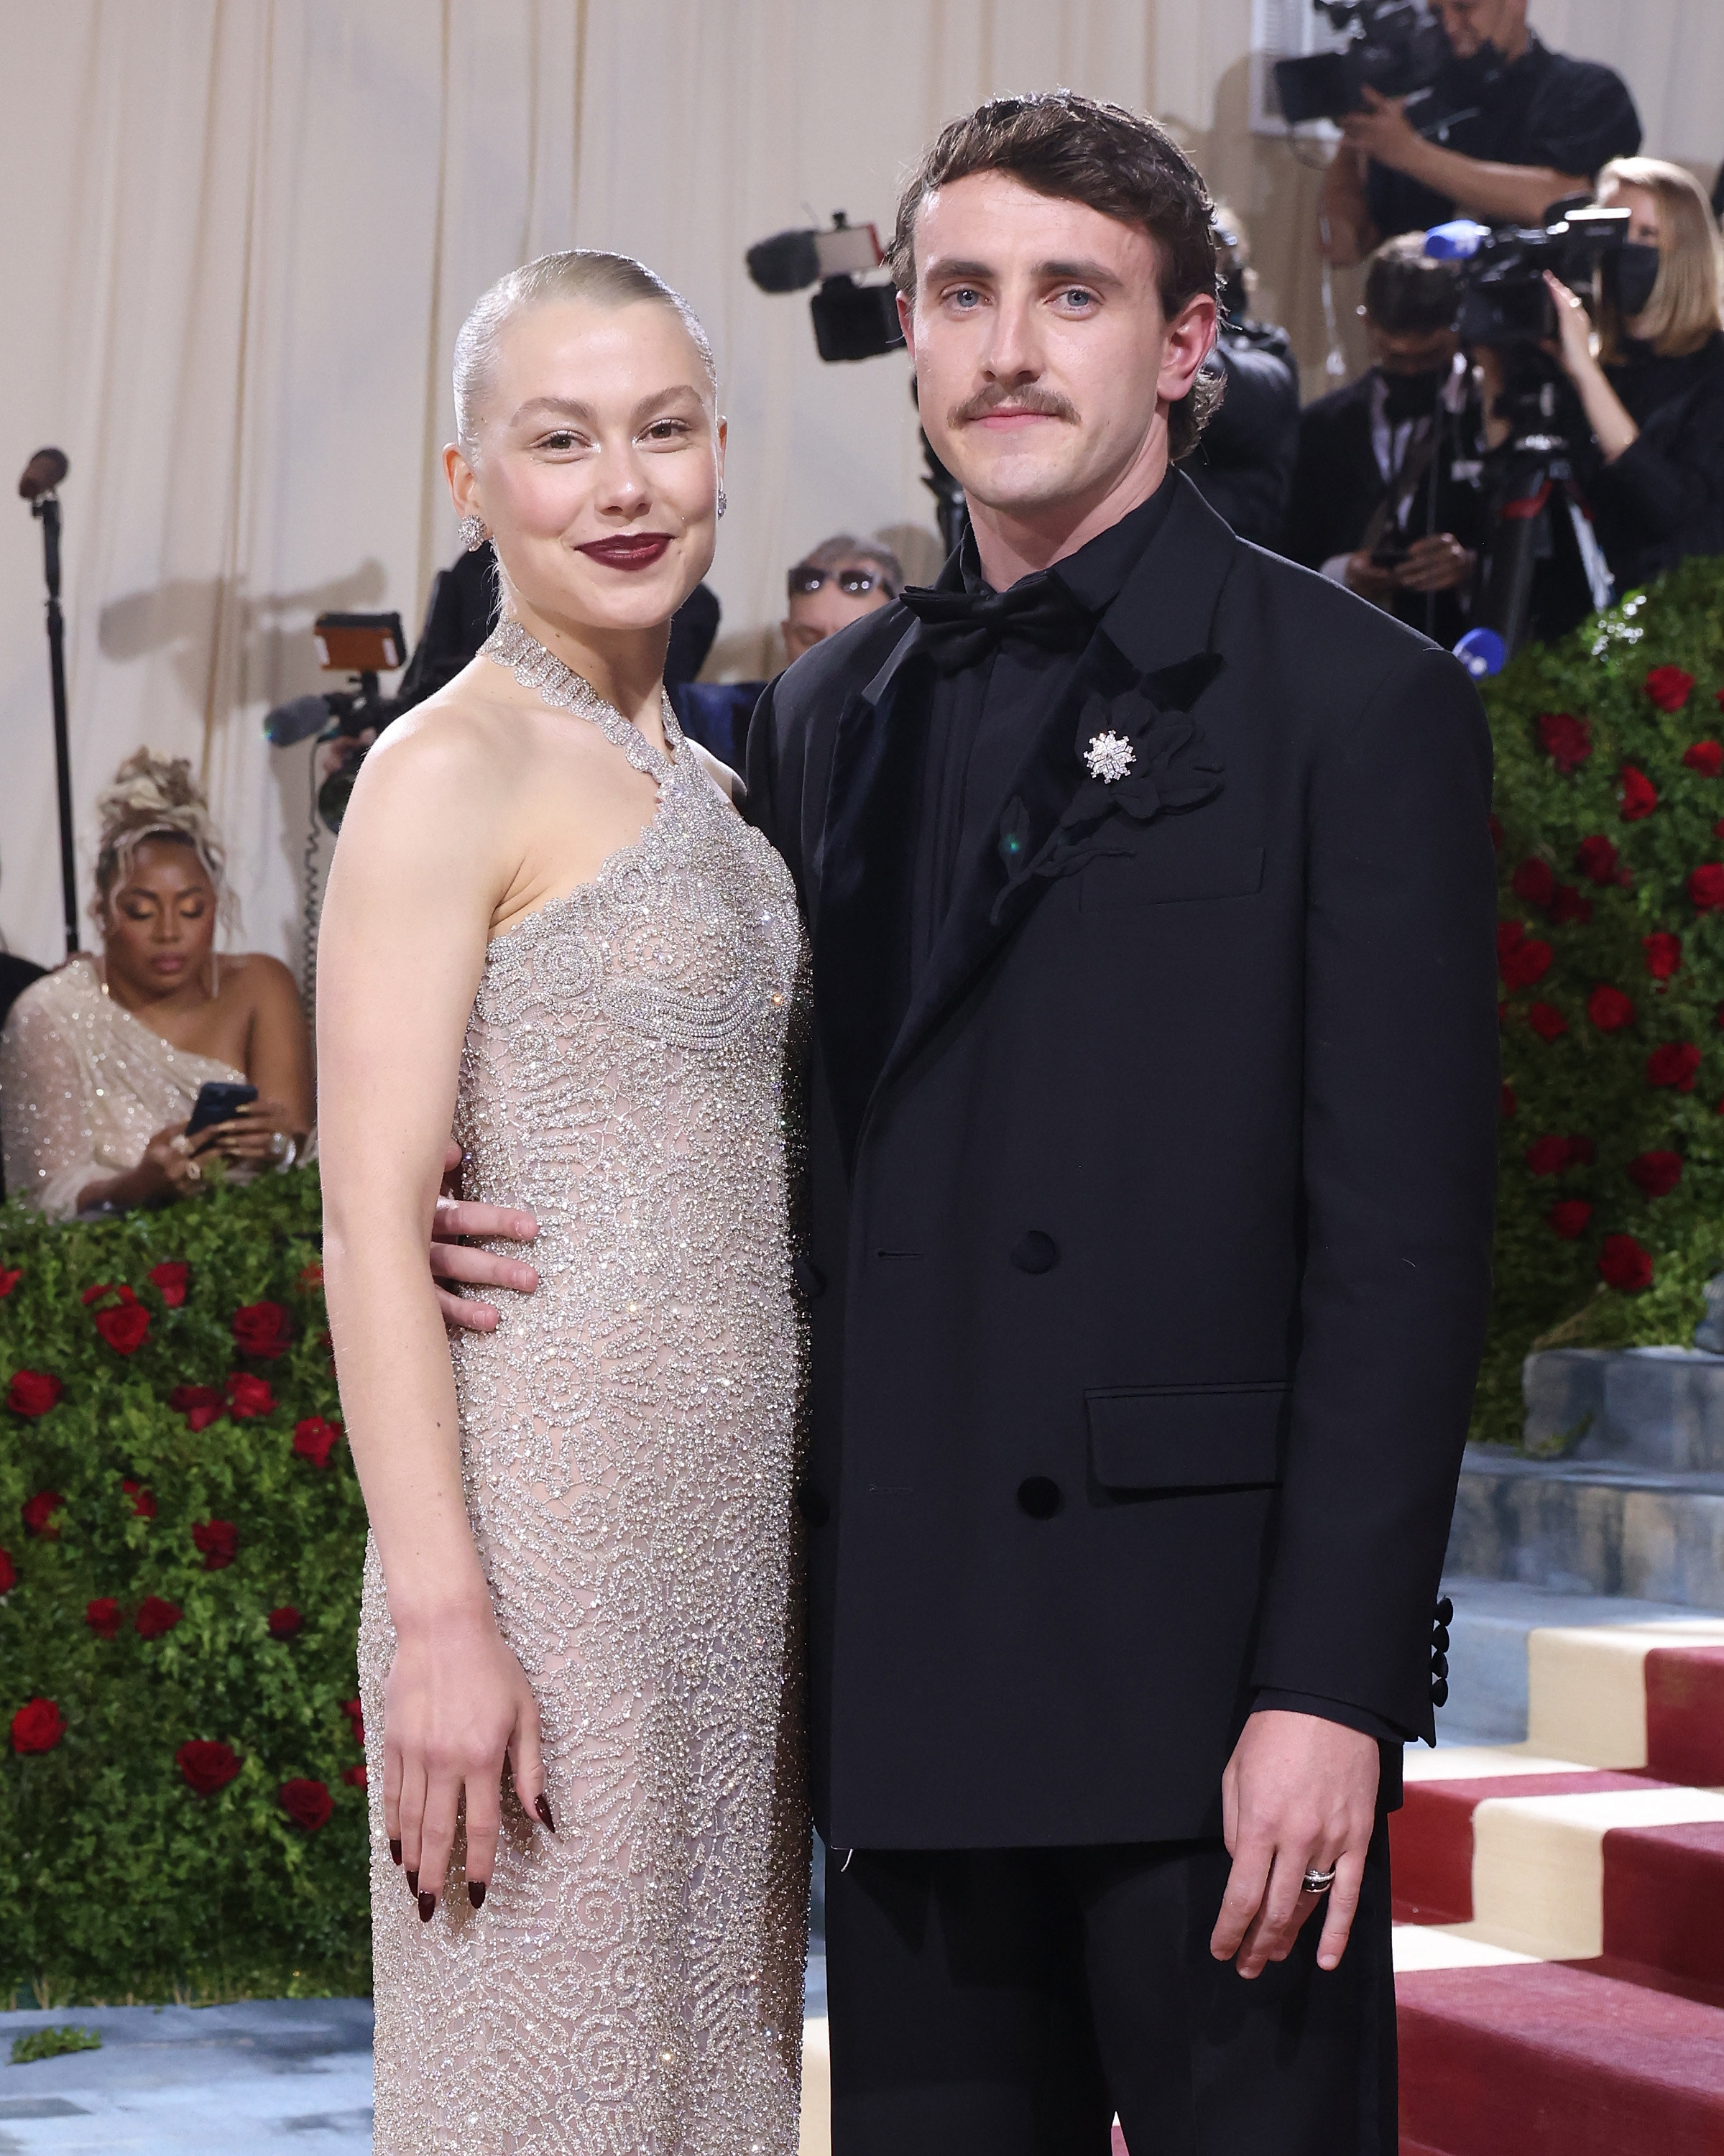 Phoebe Bridgers and Paul Mescal at a formal event